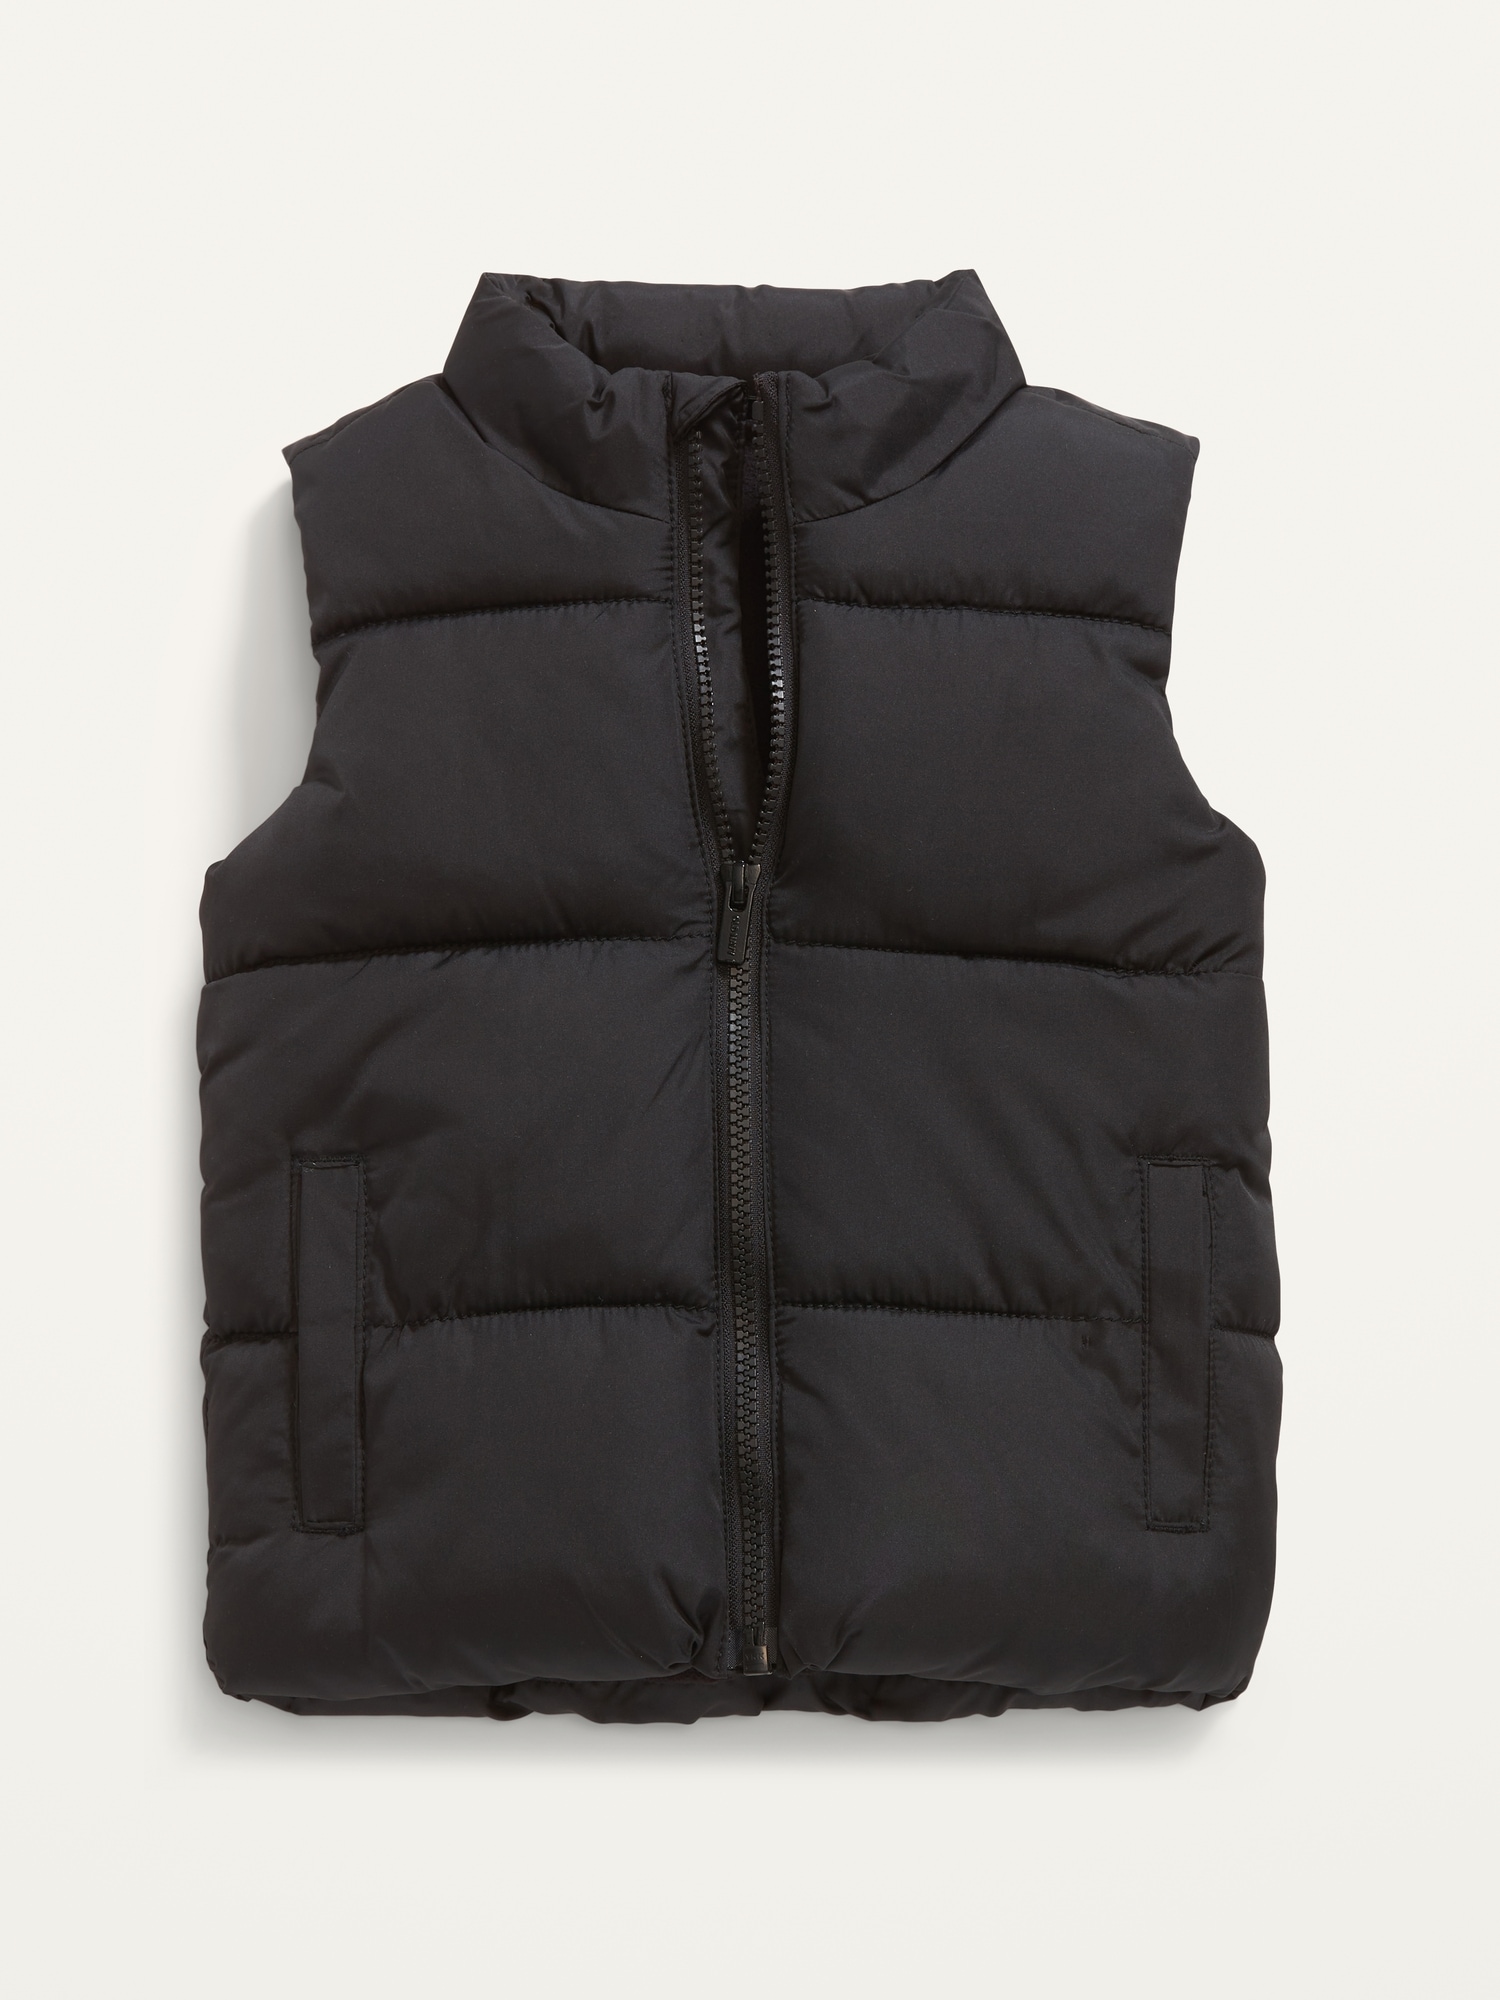 Unisex Solid Frost-Free Puffer Vest for Toddler | Old Navy